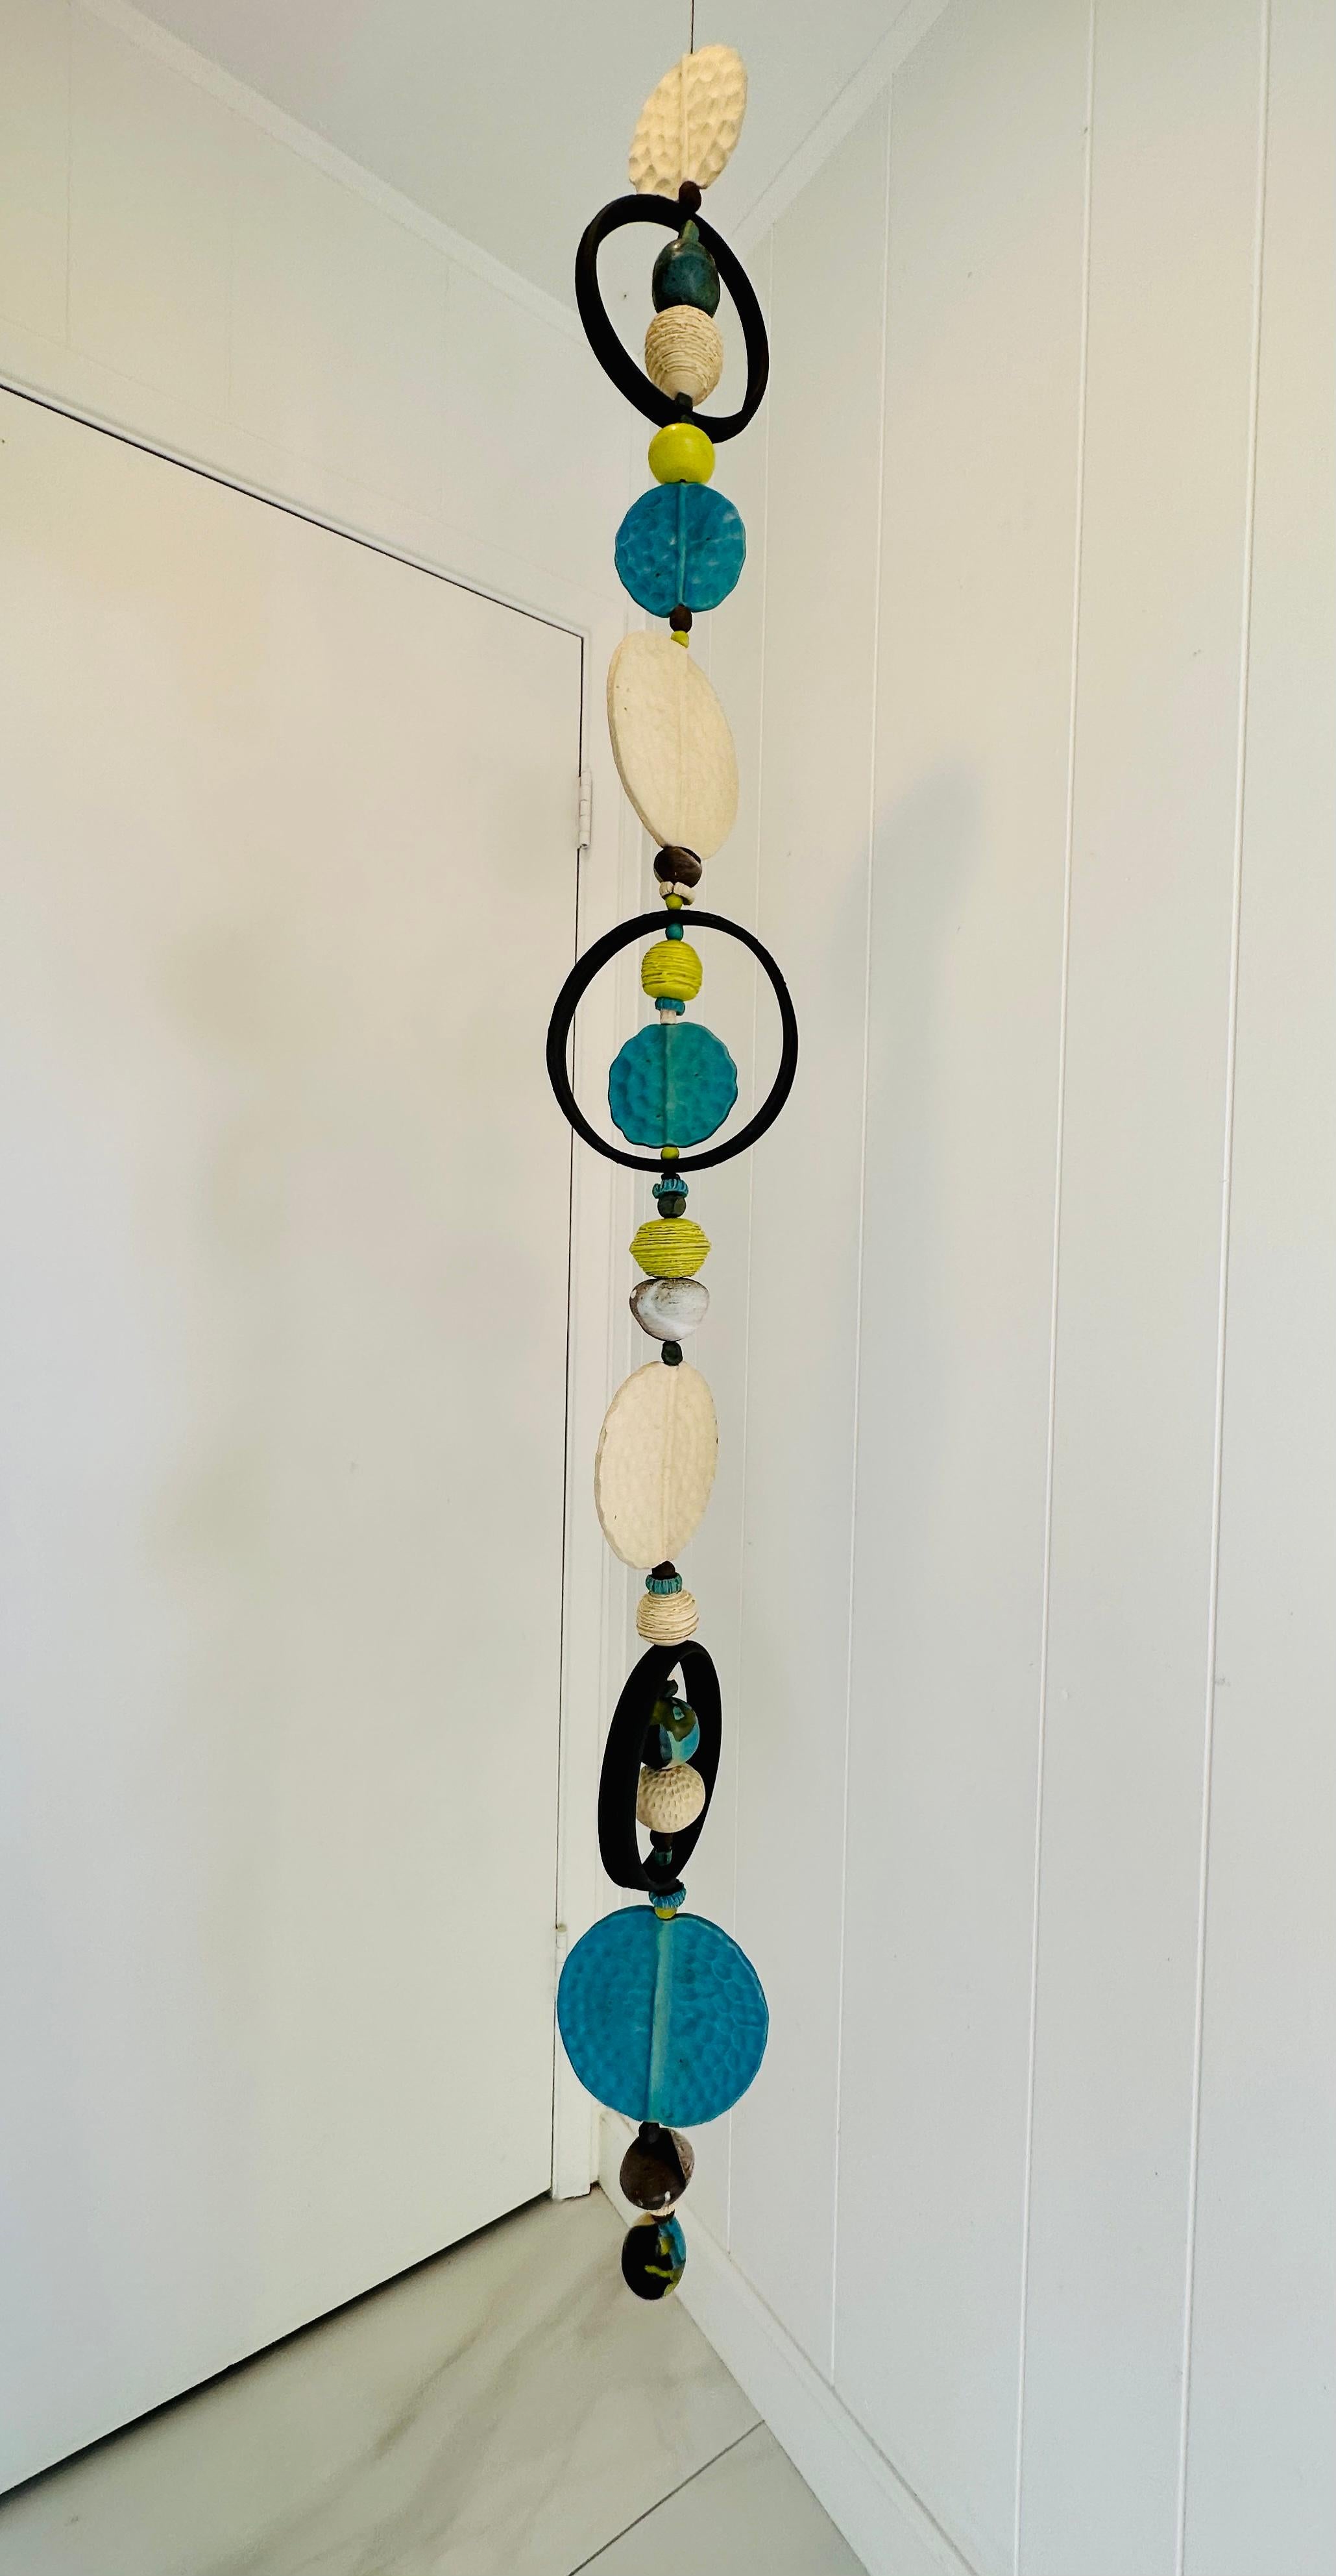 Gorgeous modernist architectural hanging ceramic sculpture by American artist , Brenda Williams.known for her craftsmanship with Cabat like feelies, totems, critters and sculptures, Brenda's unique textured shapes an d beads form an expressive Mid